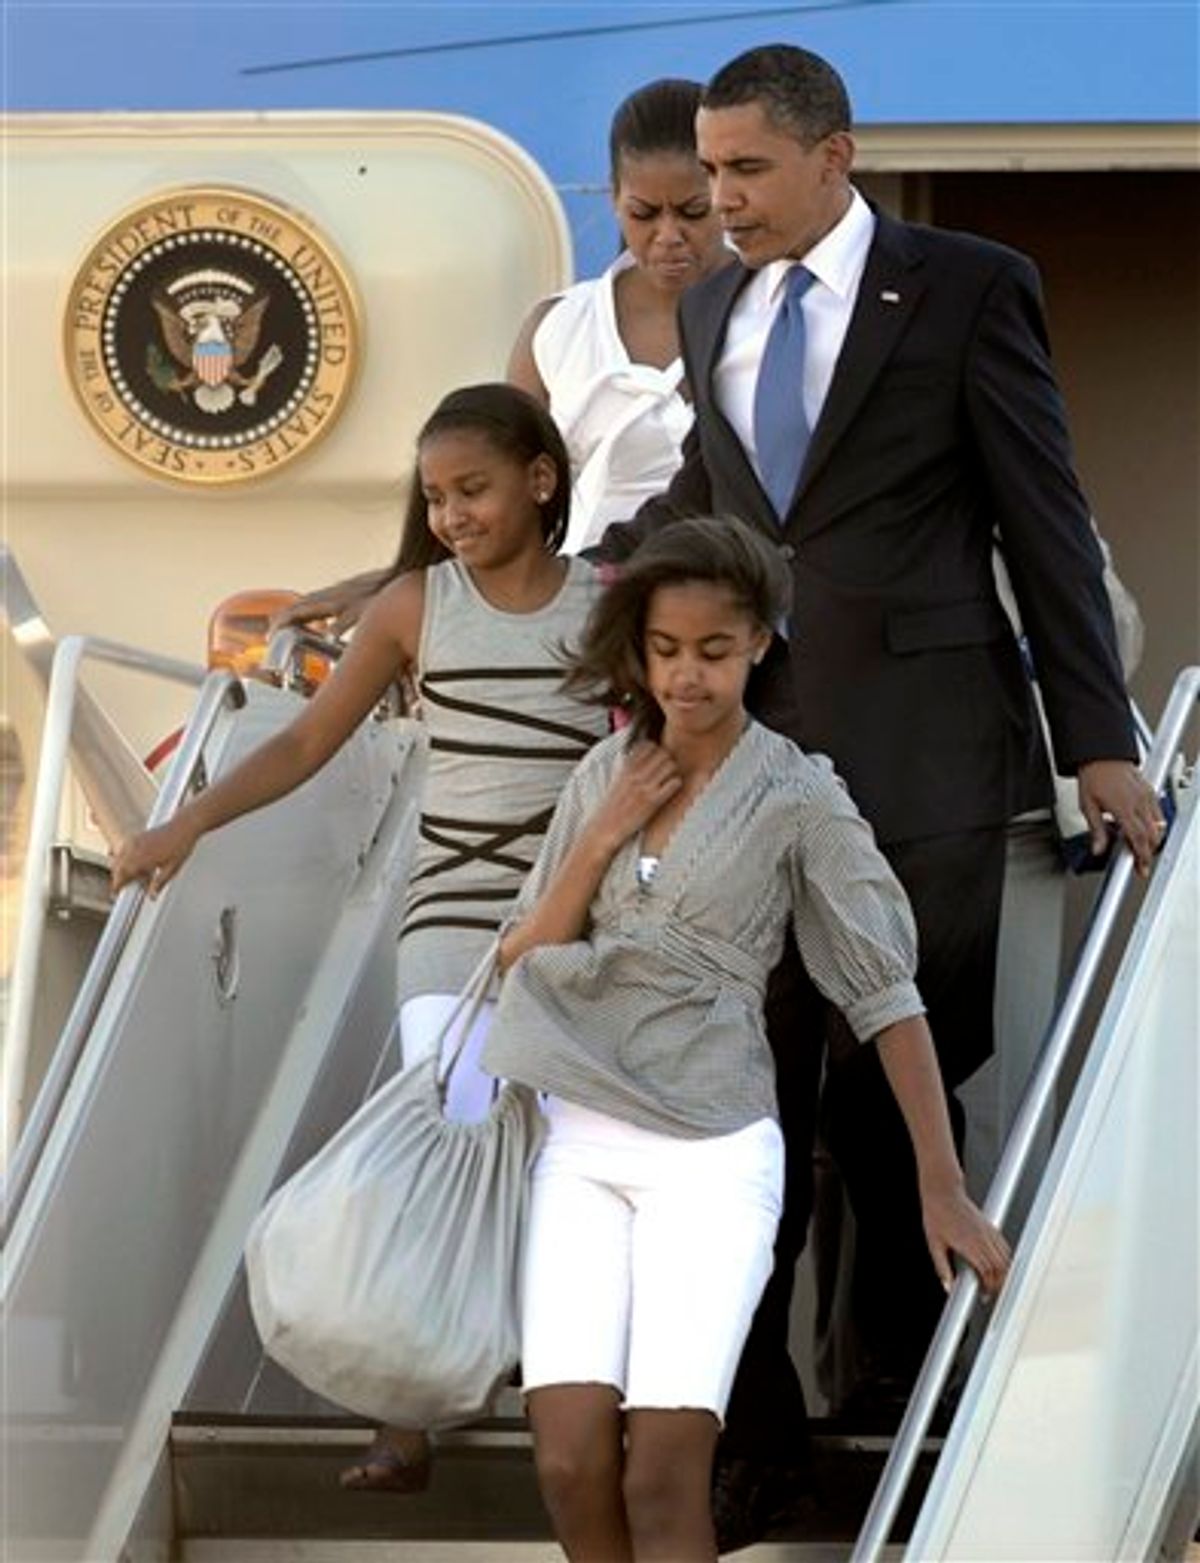 President Barack Obama, first lady  Michelle Obama, along with daughters Malia, front, and Sasha walk off Air Force One after arriving at Chicago O'Hare International Airport in Chicago, Thursday, May 27, 2010. (AP Photo/Paul Beaty) (AP)